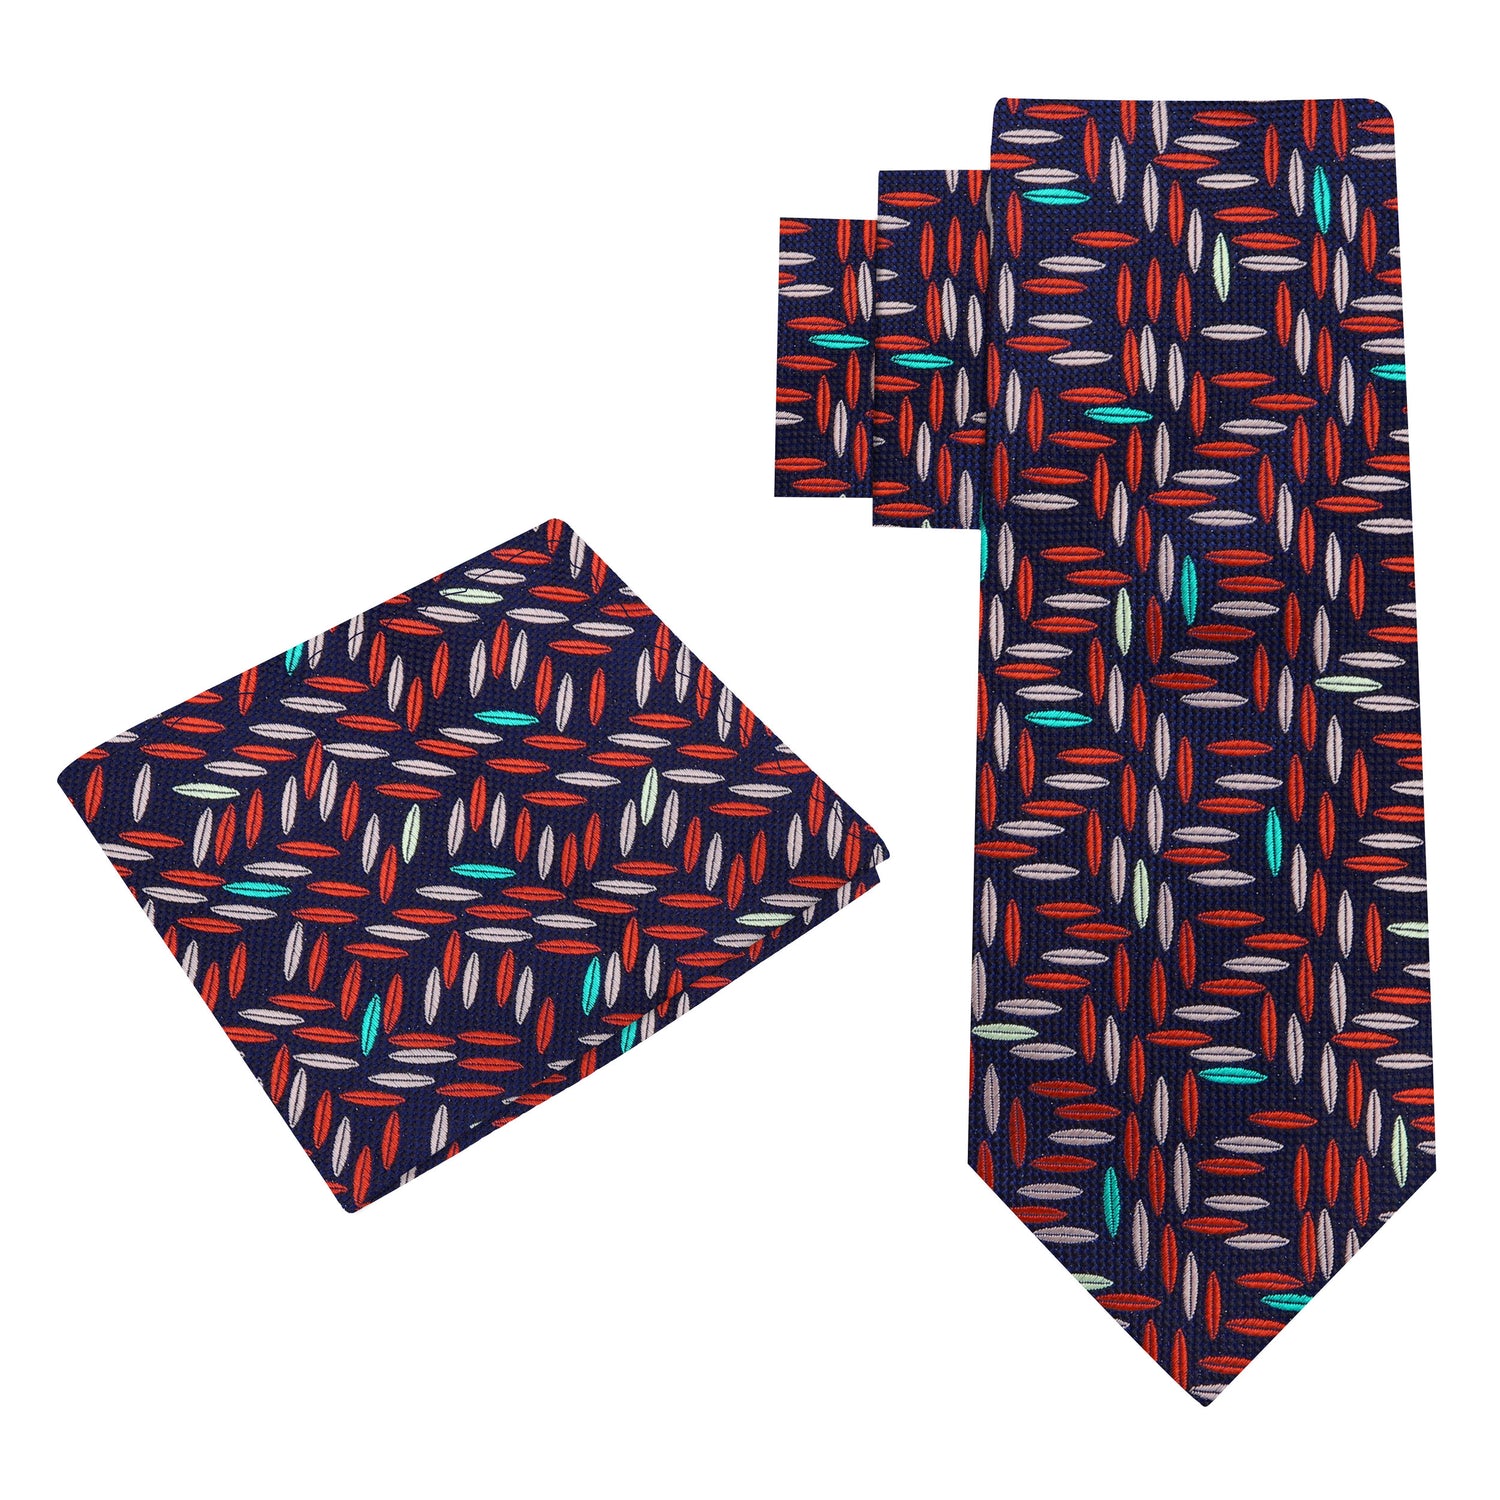 Alternative View: Blackened Blue, Wheat, Red Geometric Tie and Pocket Square